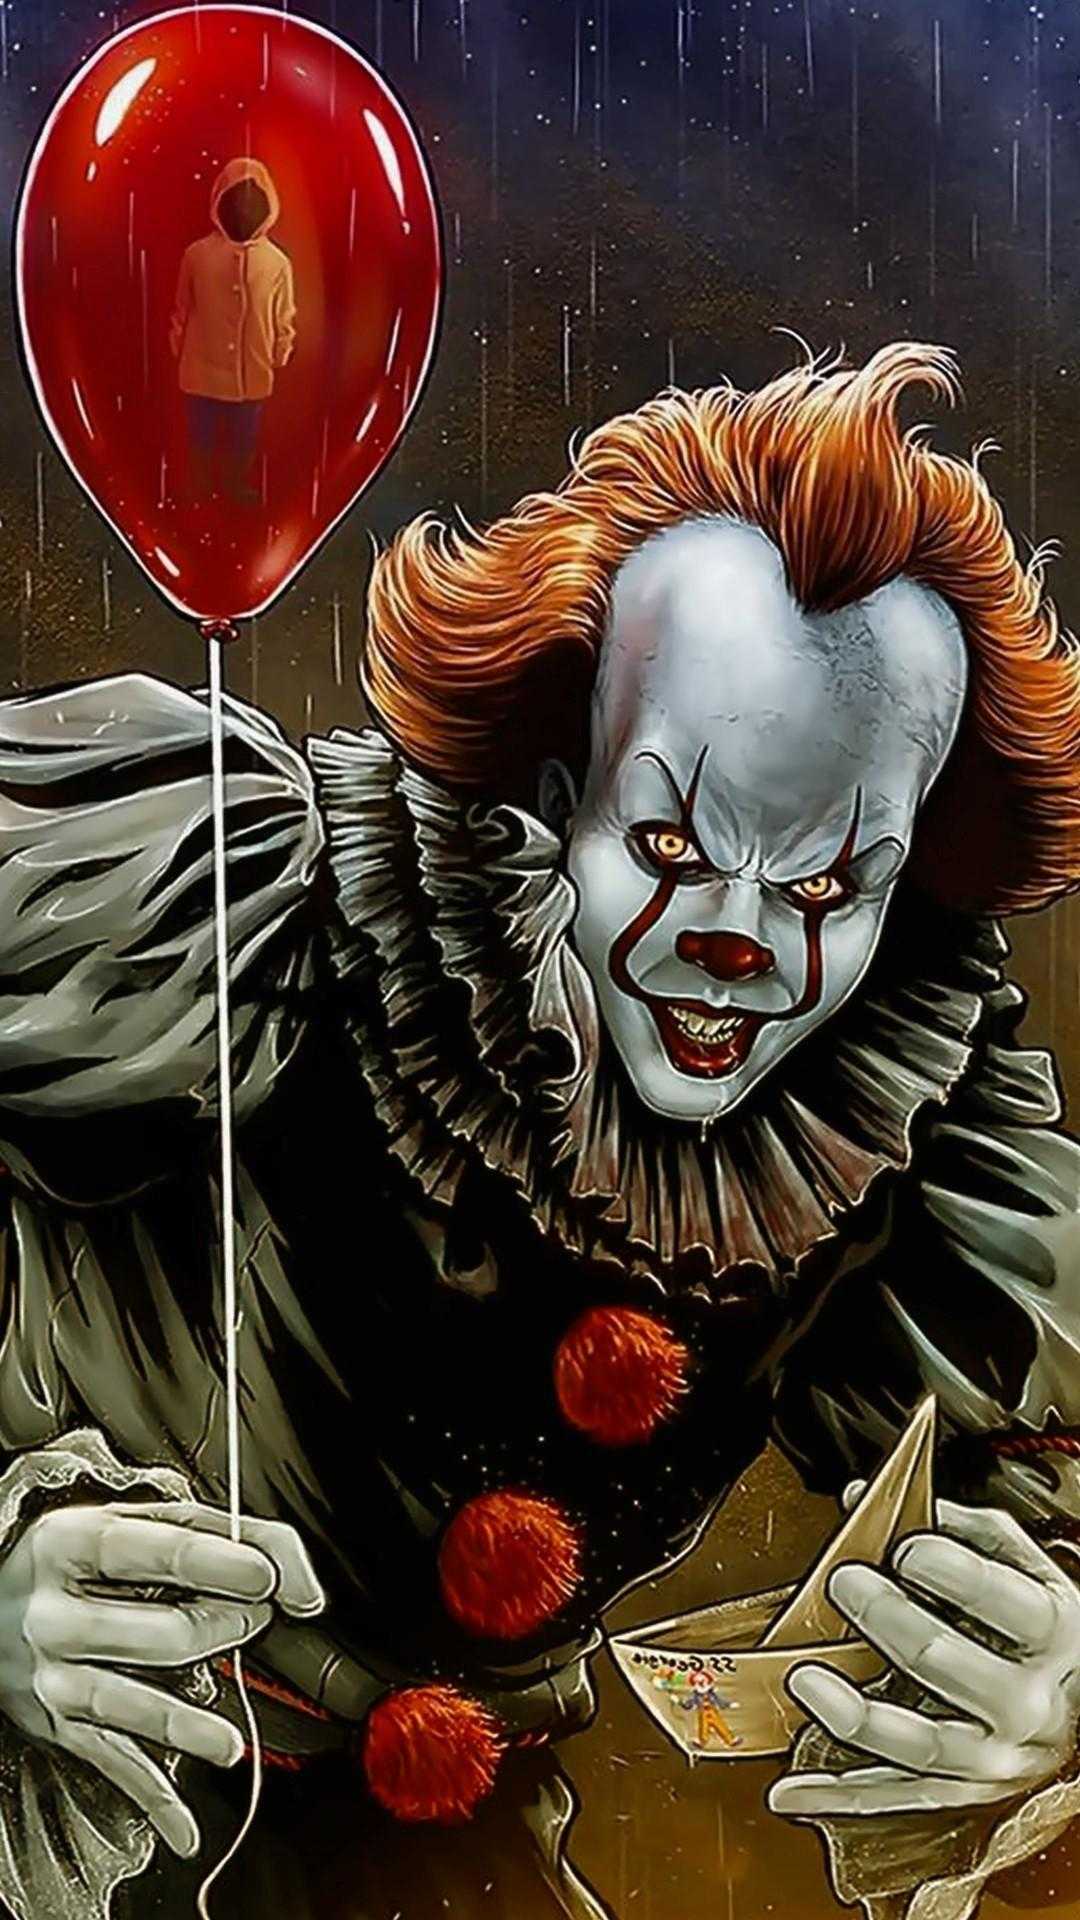 Scary Pennywise - IT 4K wallpaper download